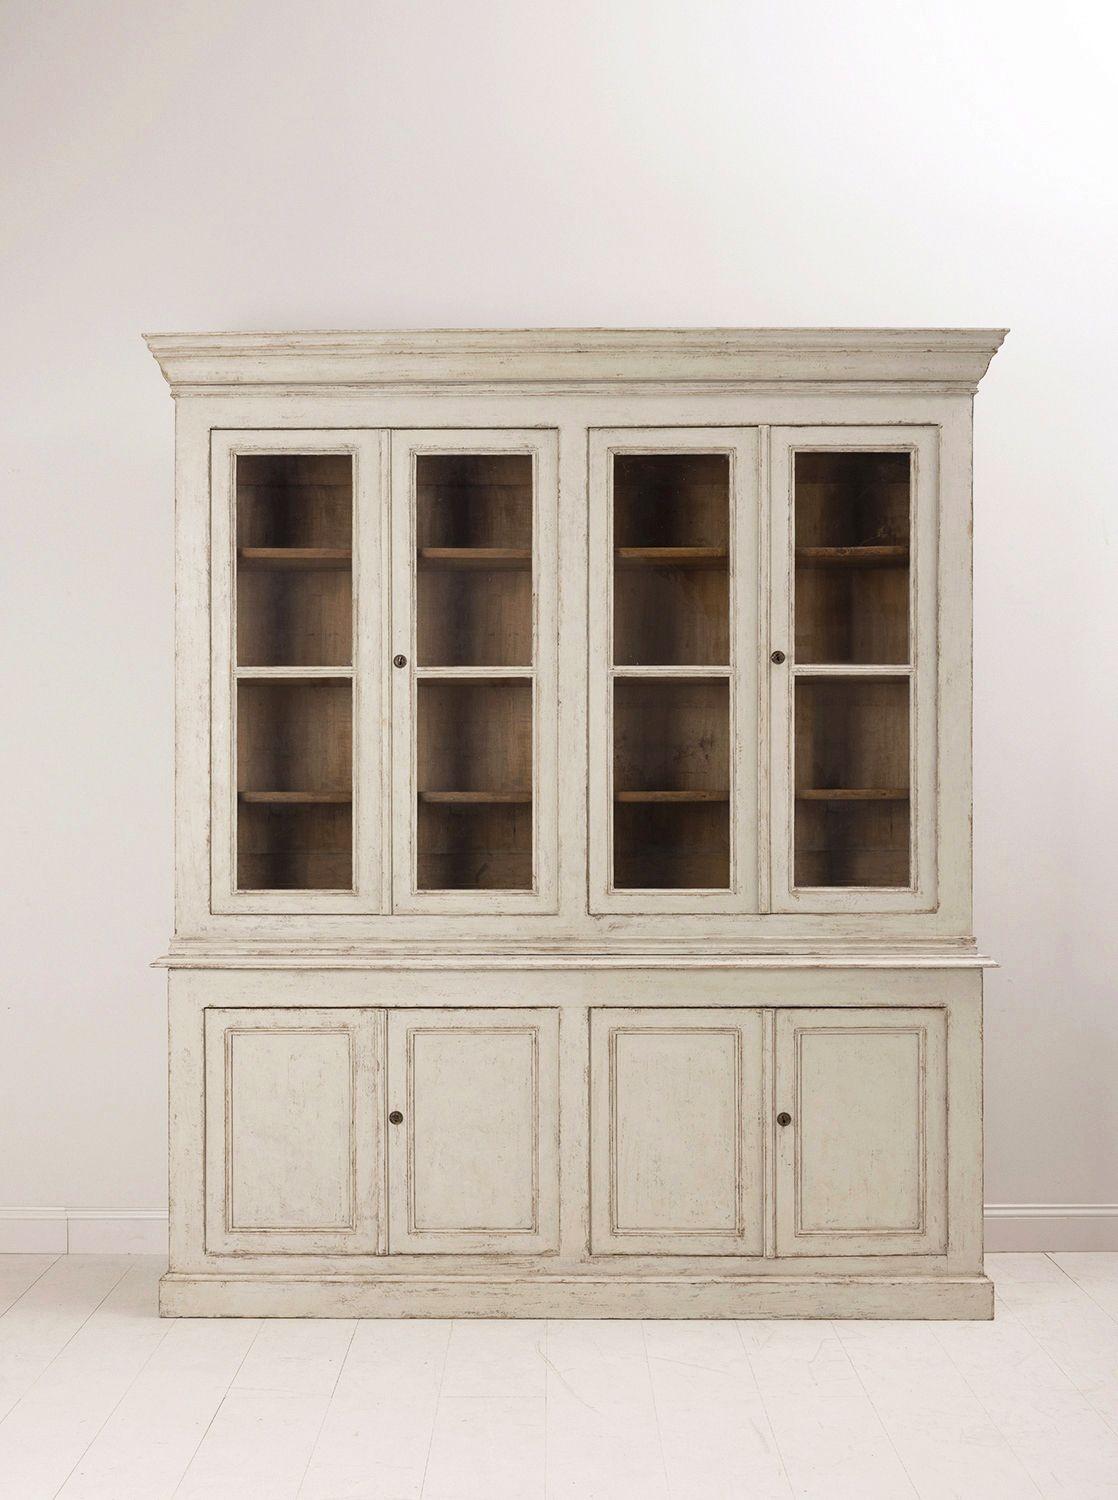 A Swedish Gustavian four-door painted vitrine cabinet from the 19th century. This classically designed piece is made in two parts. The upper section features three fixed shelves behind original glass doors. Below there are four doors that open to